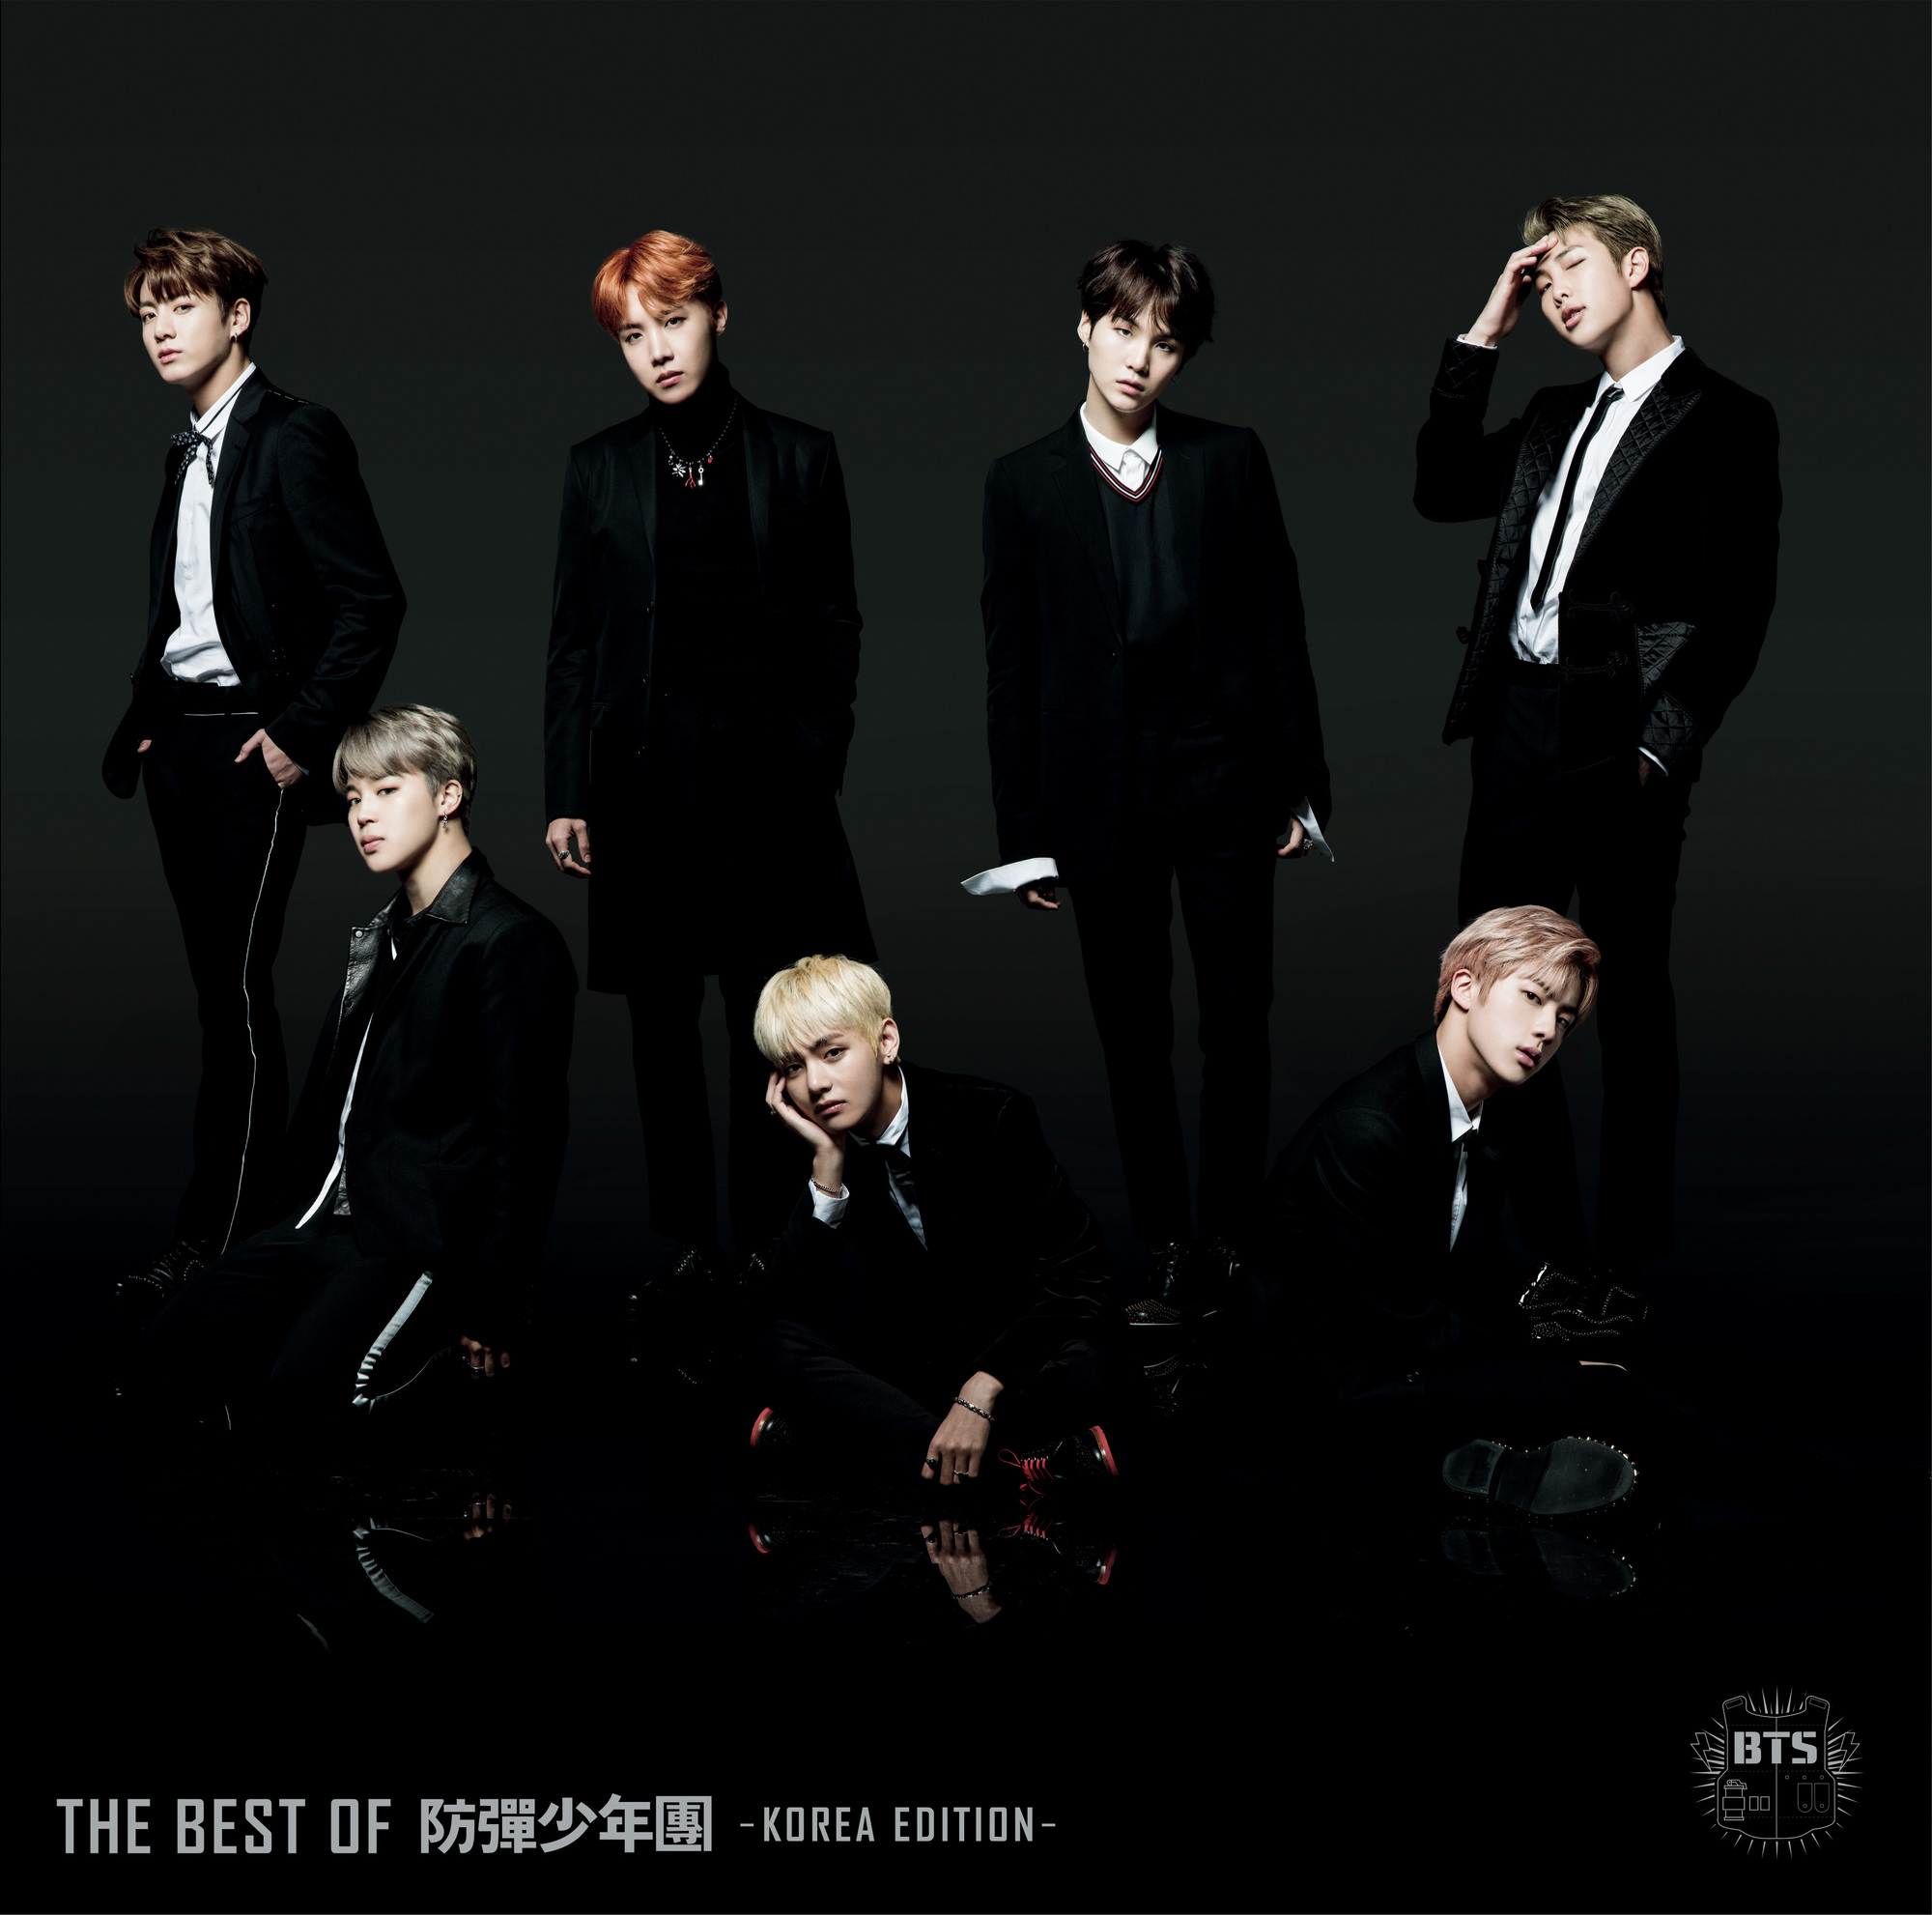 [Info] BTS will be released a compilation album “BEST OF” in Japan on